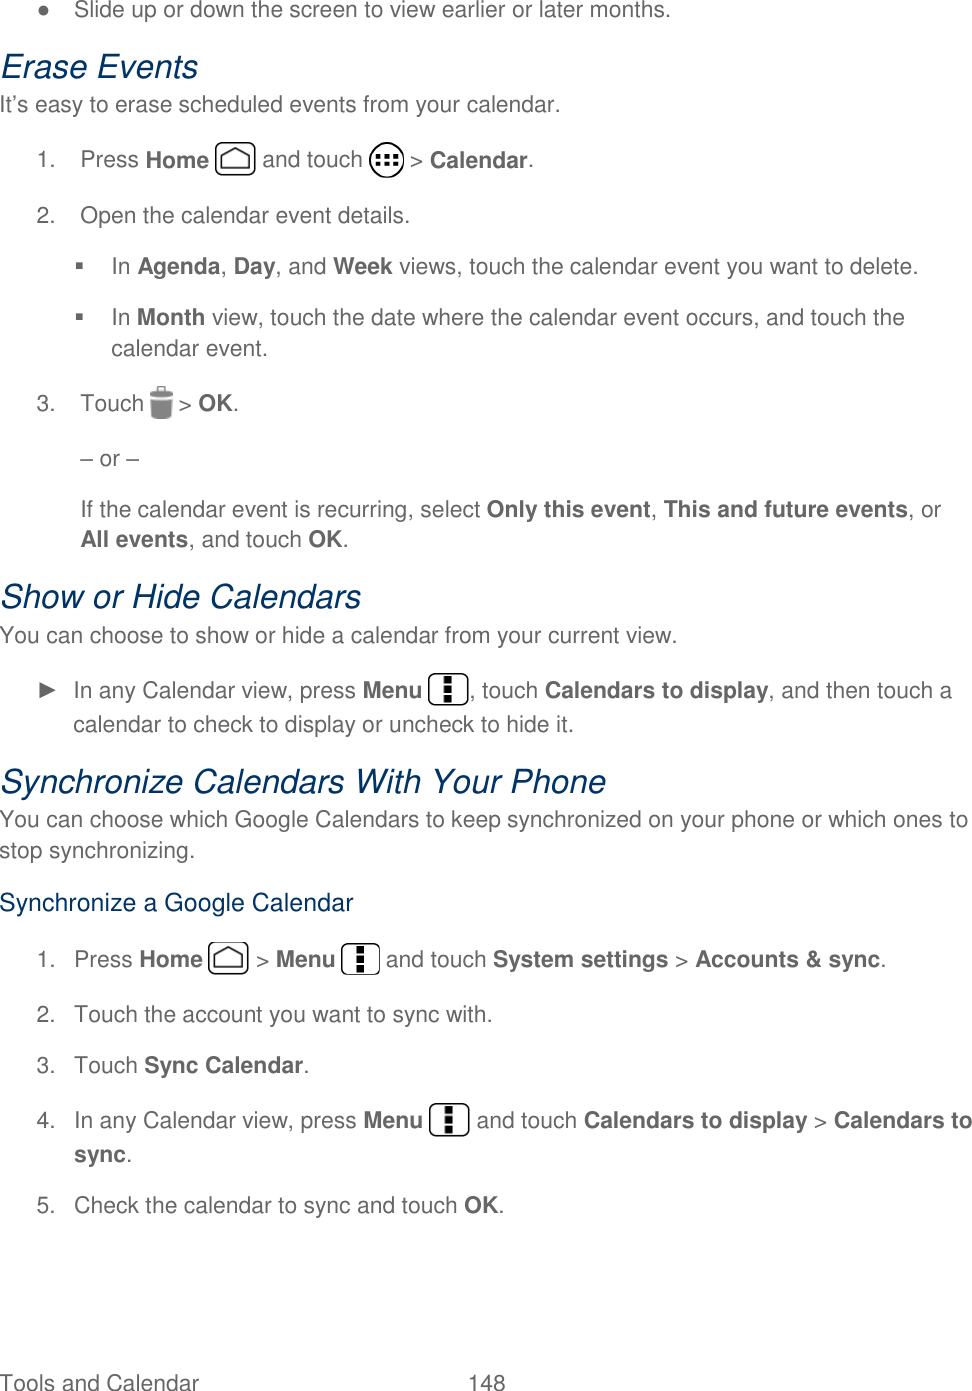  Tools and Calendar  148   ●  Slide up or down the screen to view earlier or later months. Erase Events It’s easy to erase scheduled events from your calendar. 1.  Press Home   and touch   &gt; Calendar. 2.  Open the calendar event details.   In Agenda, Day, and Week views, touch the calendar event you want to delete.   In Month view, touch the date where the calendar event occurs, and touch the calendar event. 3.  Touch   &gt; OK.  – or – If the calendar event is recurring, select Only this event, This and future events, or All events, and touch OK. Show or Hide Calendars You can choose to show or hide a calendar from your current view. ►  In any Calendar view, press Menu  , touch Calendars to display, and then touch a calendar to check to display or uncheck to hide it.  Synchronize Calendars With Your Phone You can choose which Google Calendars to keep synchronized on your phone or which ones to stop synchronizing. Synchronize a Google Calendar 1.  Press Home   &gt; Menu   and touch System settings &gt; Accounts &amp; sync. 2.  Touch the account you want to sync with. 3.  Touch Sync Calendar. 4.  In any Calendar view, press Menu   and touch Calendars to display &gt; Calendars to sync. 5. Check the calendar to sync and touch OK. 